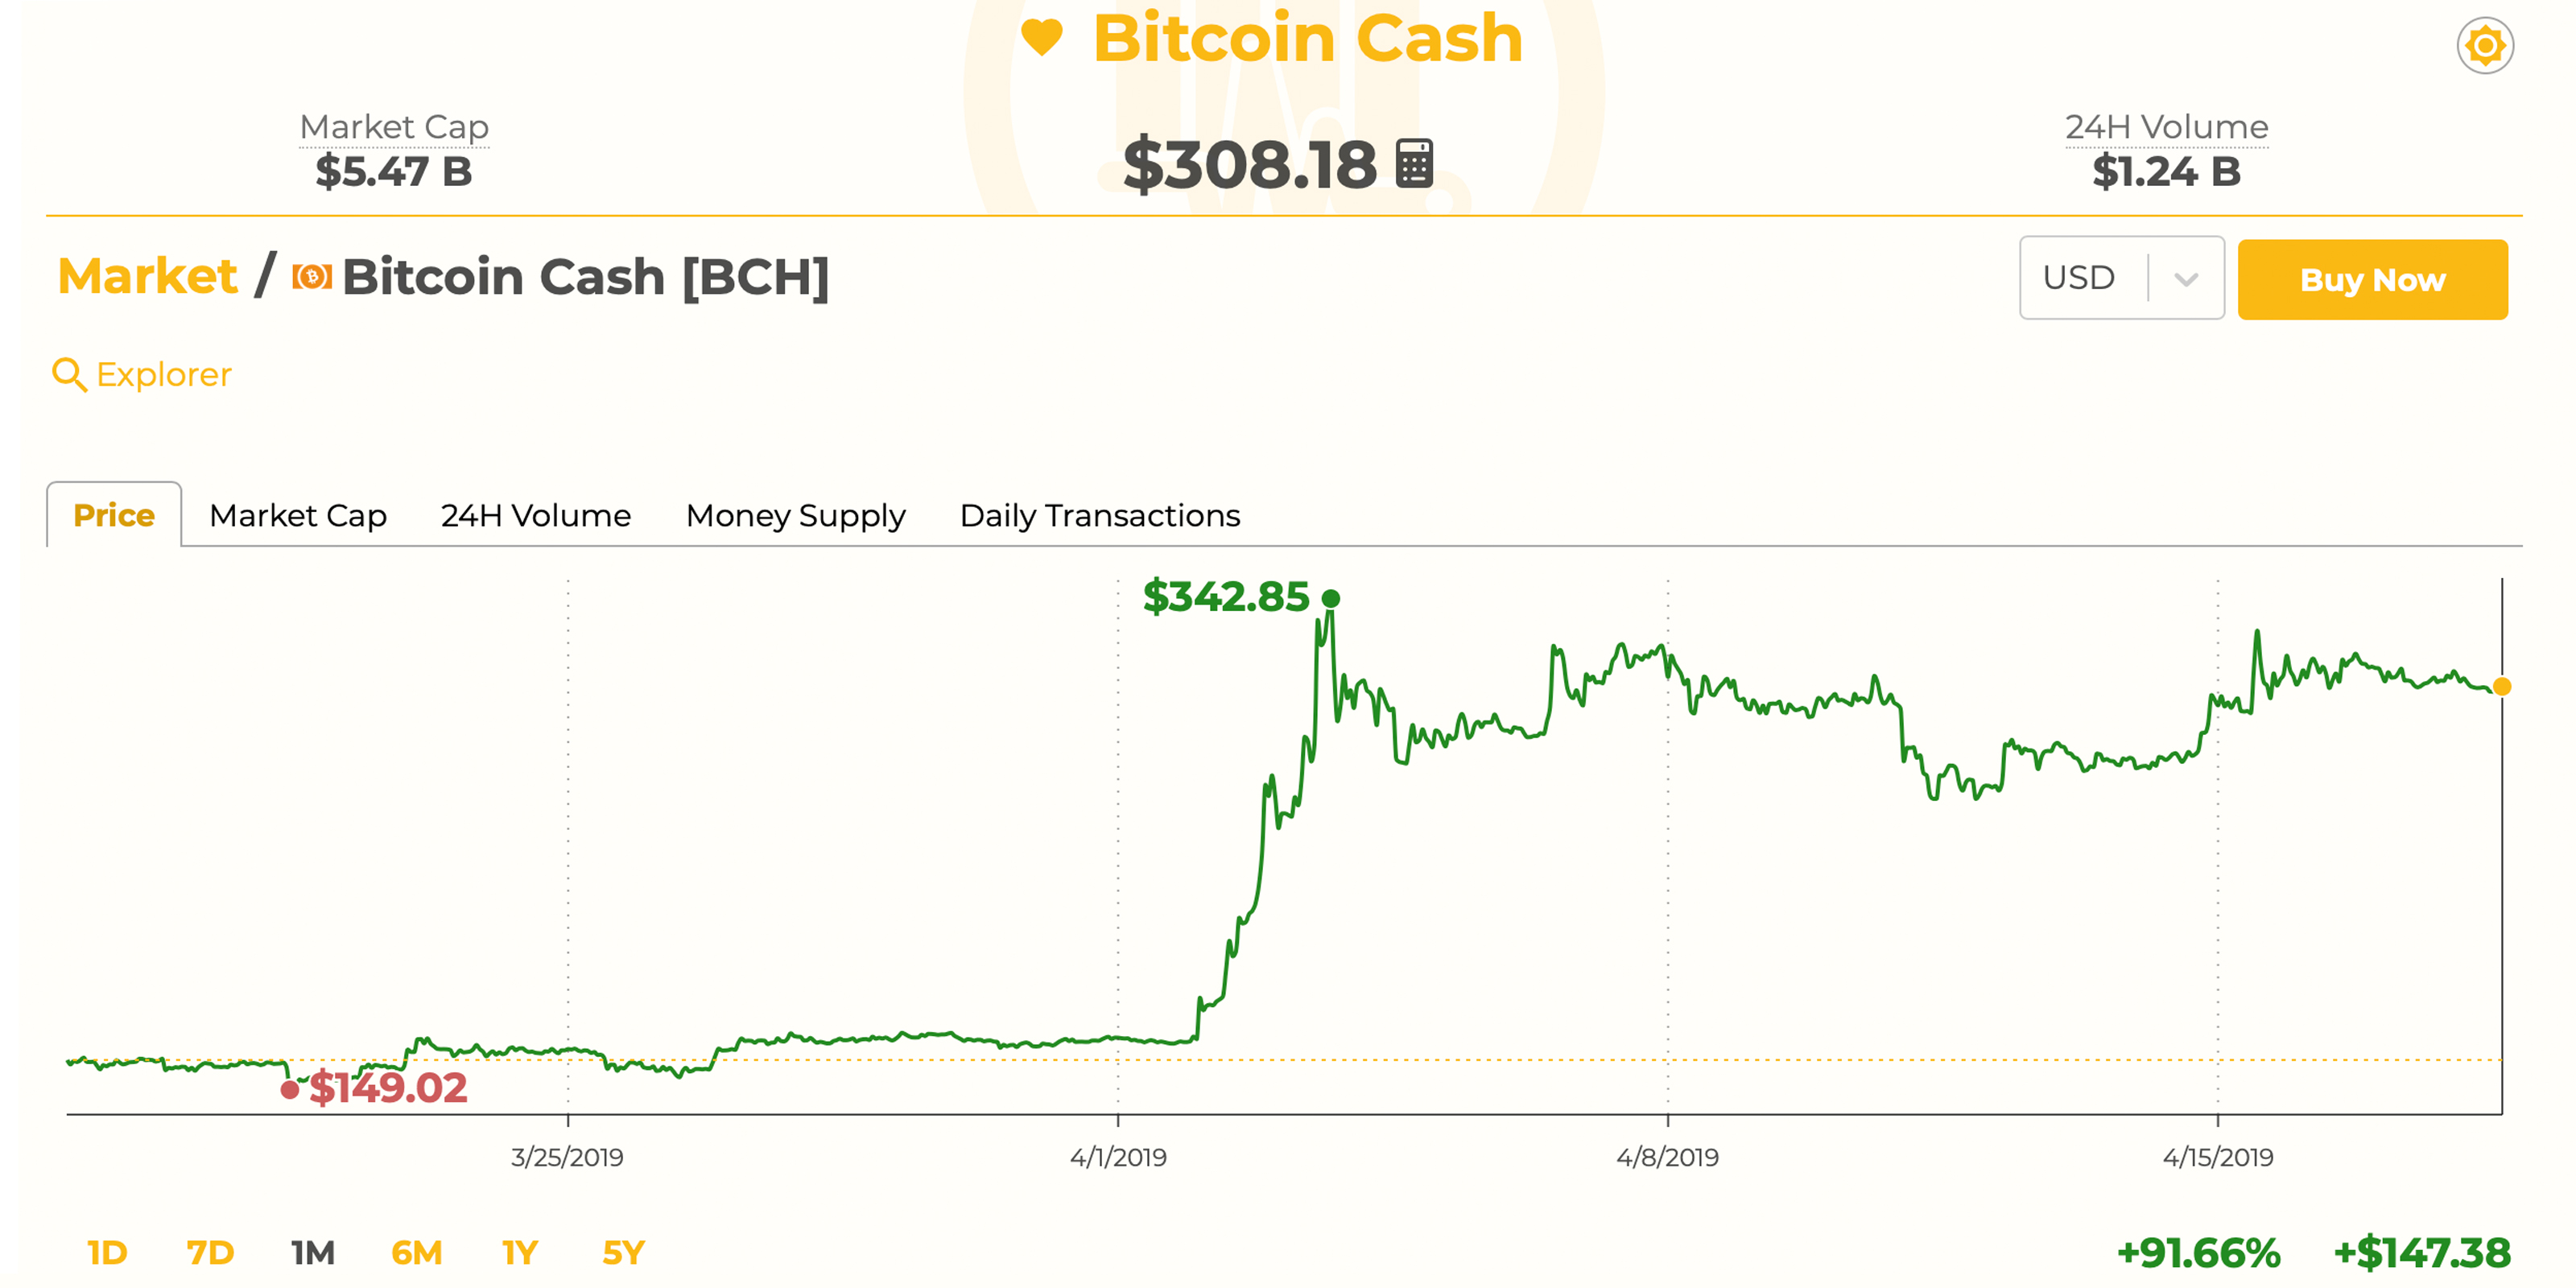 Statistics Show Bitcoin Cash Is a Strong Contender After Crypto Winter